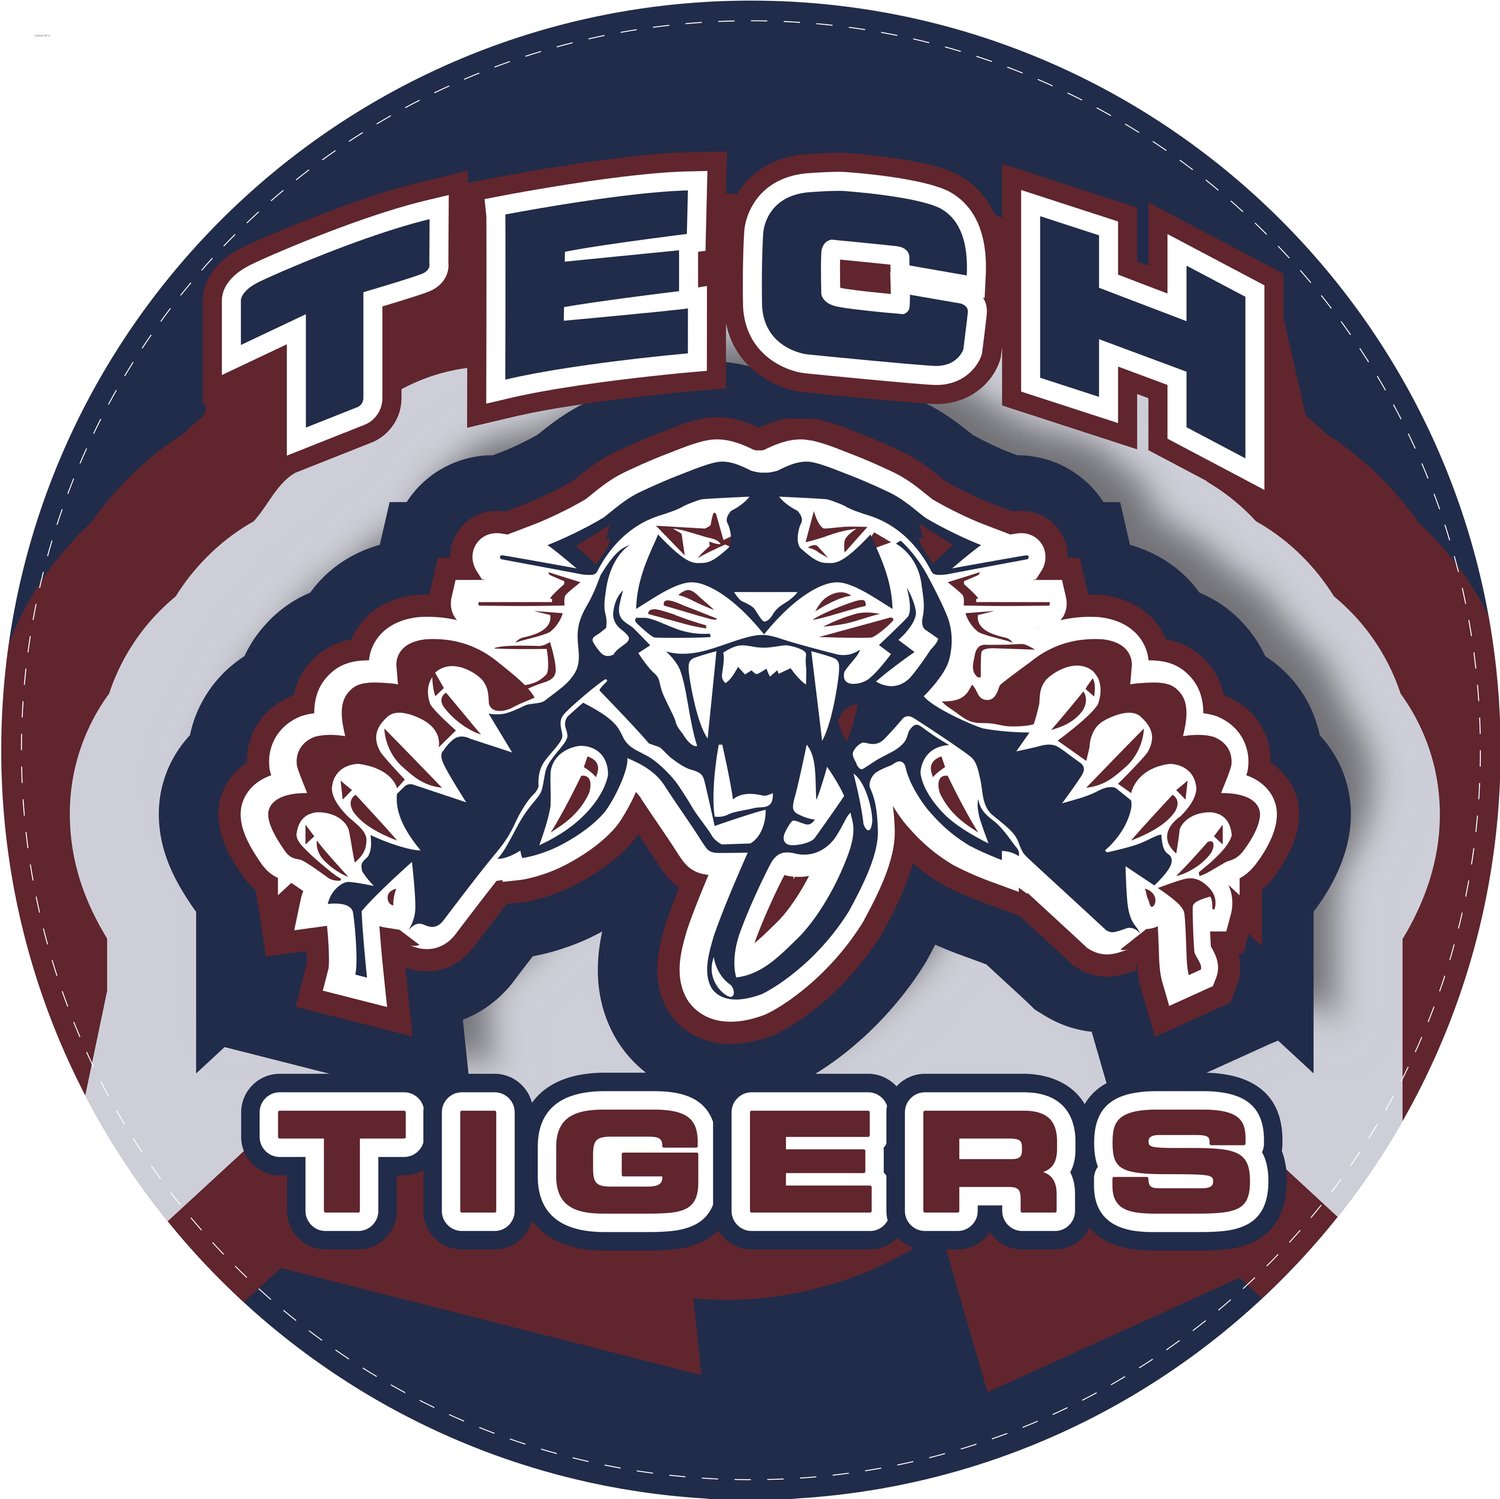 Home of the Tech Tiger